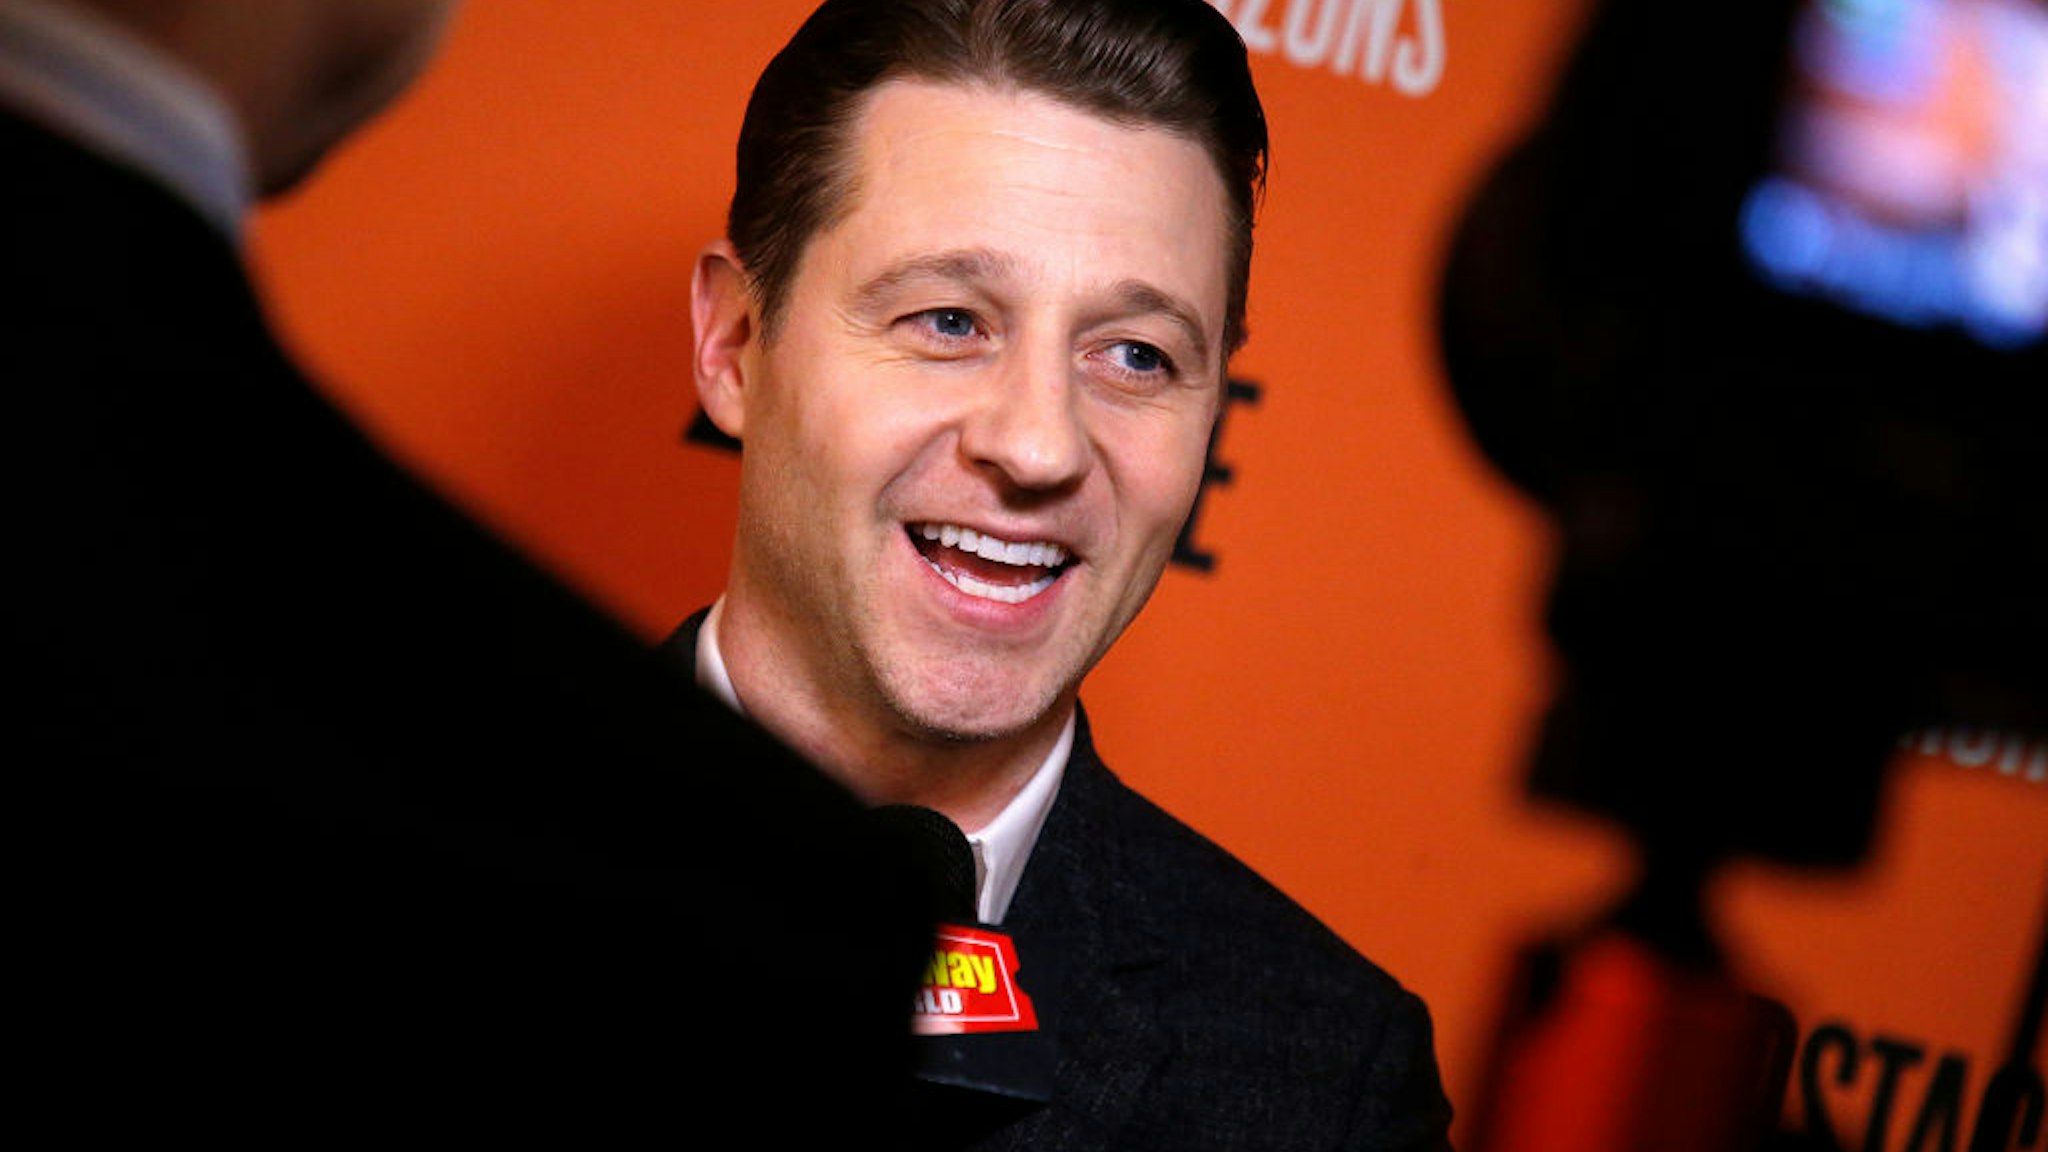 NEW YORK, NEW YORK - JANUARY 23: Ben McKenzie attends "Grand Horizons" Broadway opening night at Hayes Theater on January 23, 2020 in New York City. (Photo by John Lamparski/Getty Images)